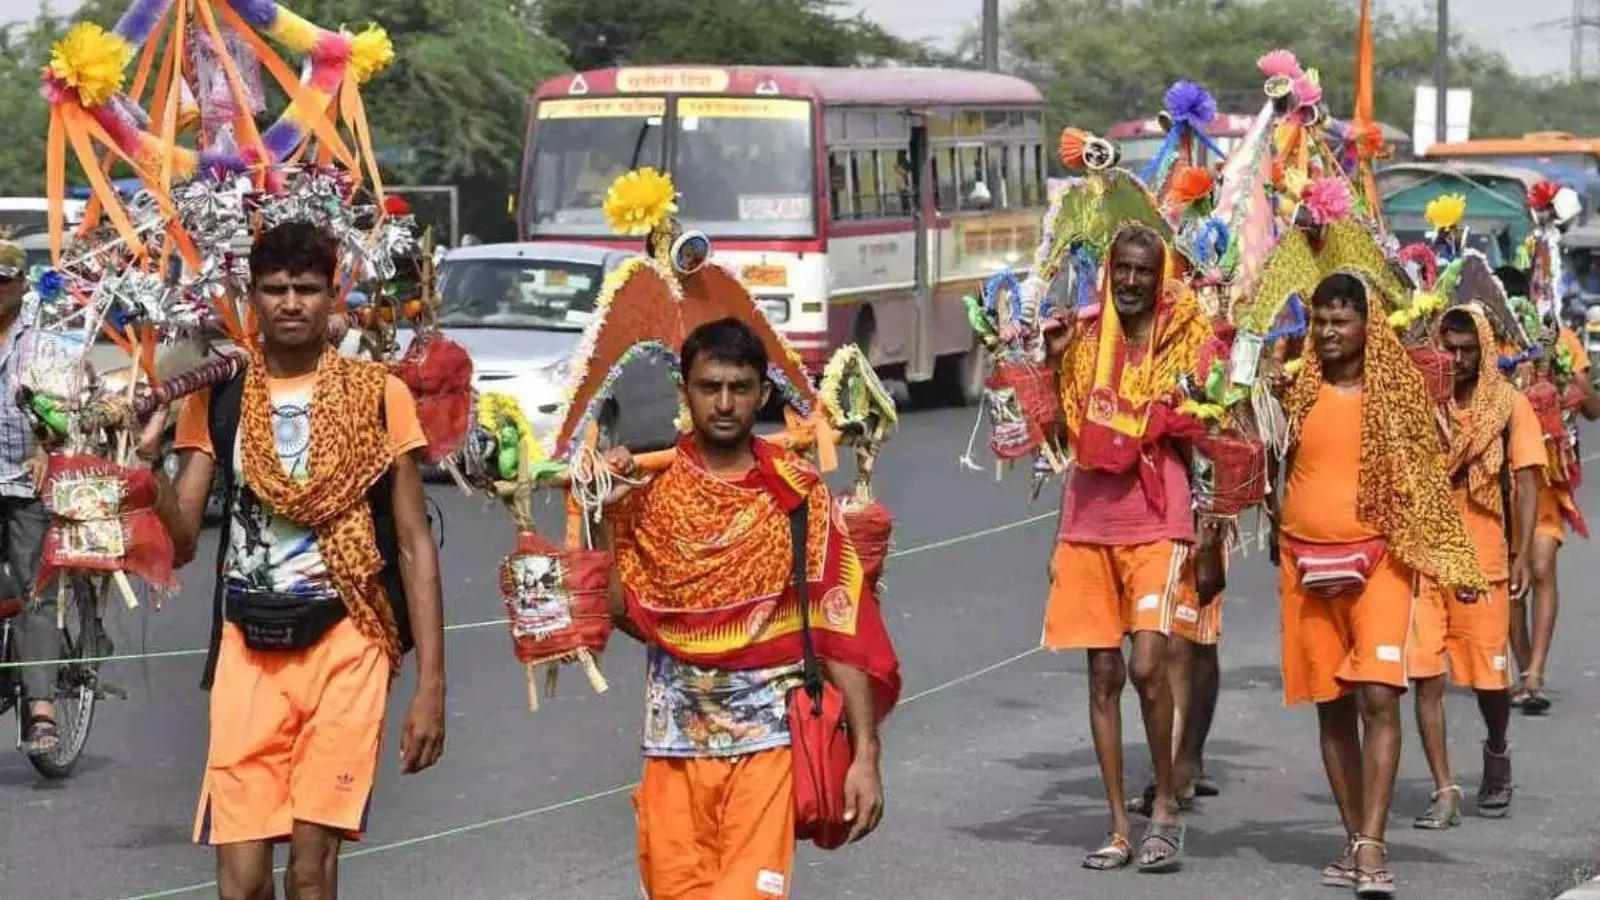 Kanwar Yatra: Delhi-Meerut expressway to stay shut on these dates. Here're full traffic restrictions, route diversions and other details 